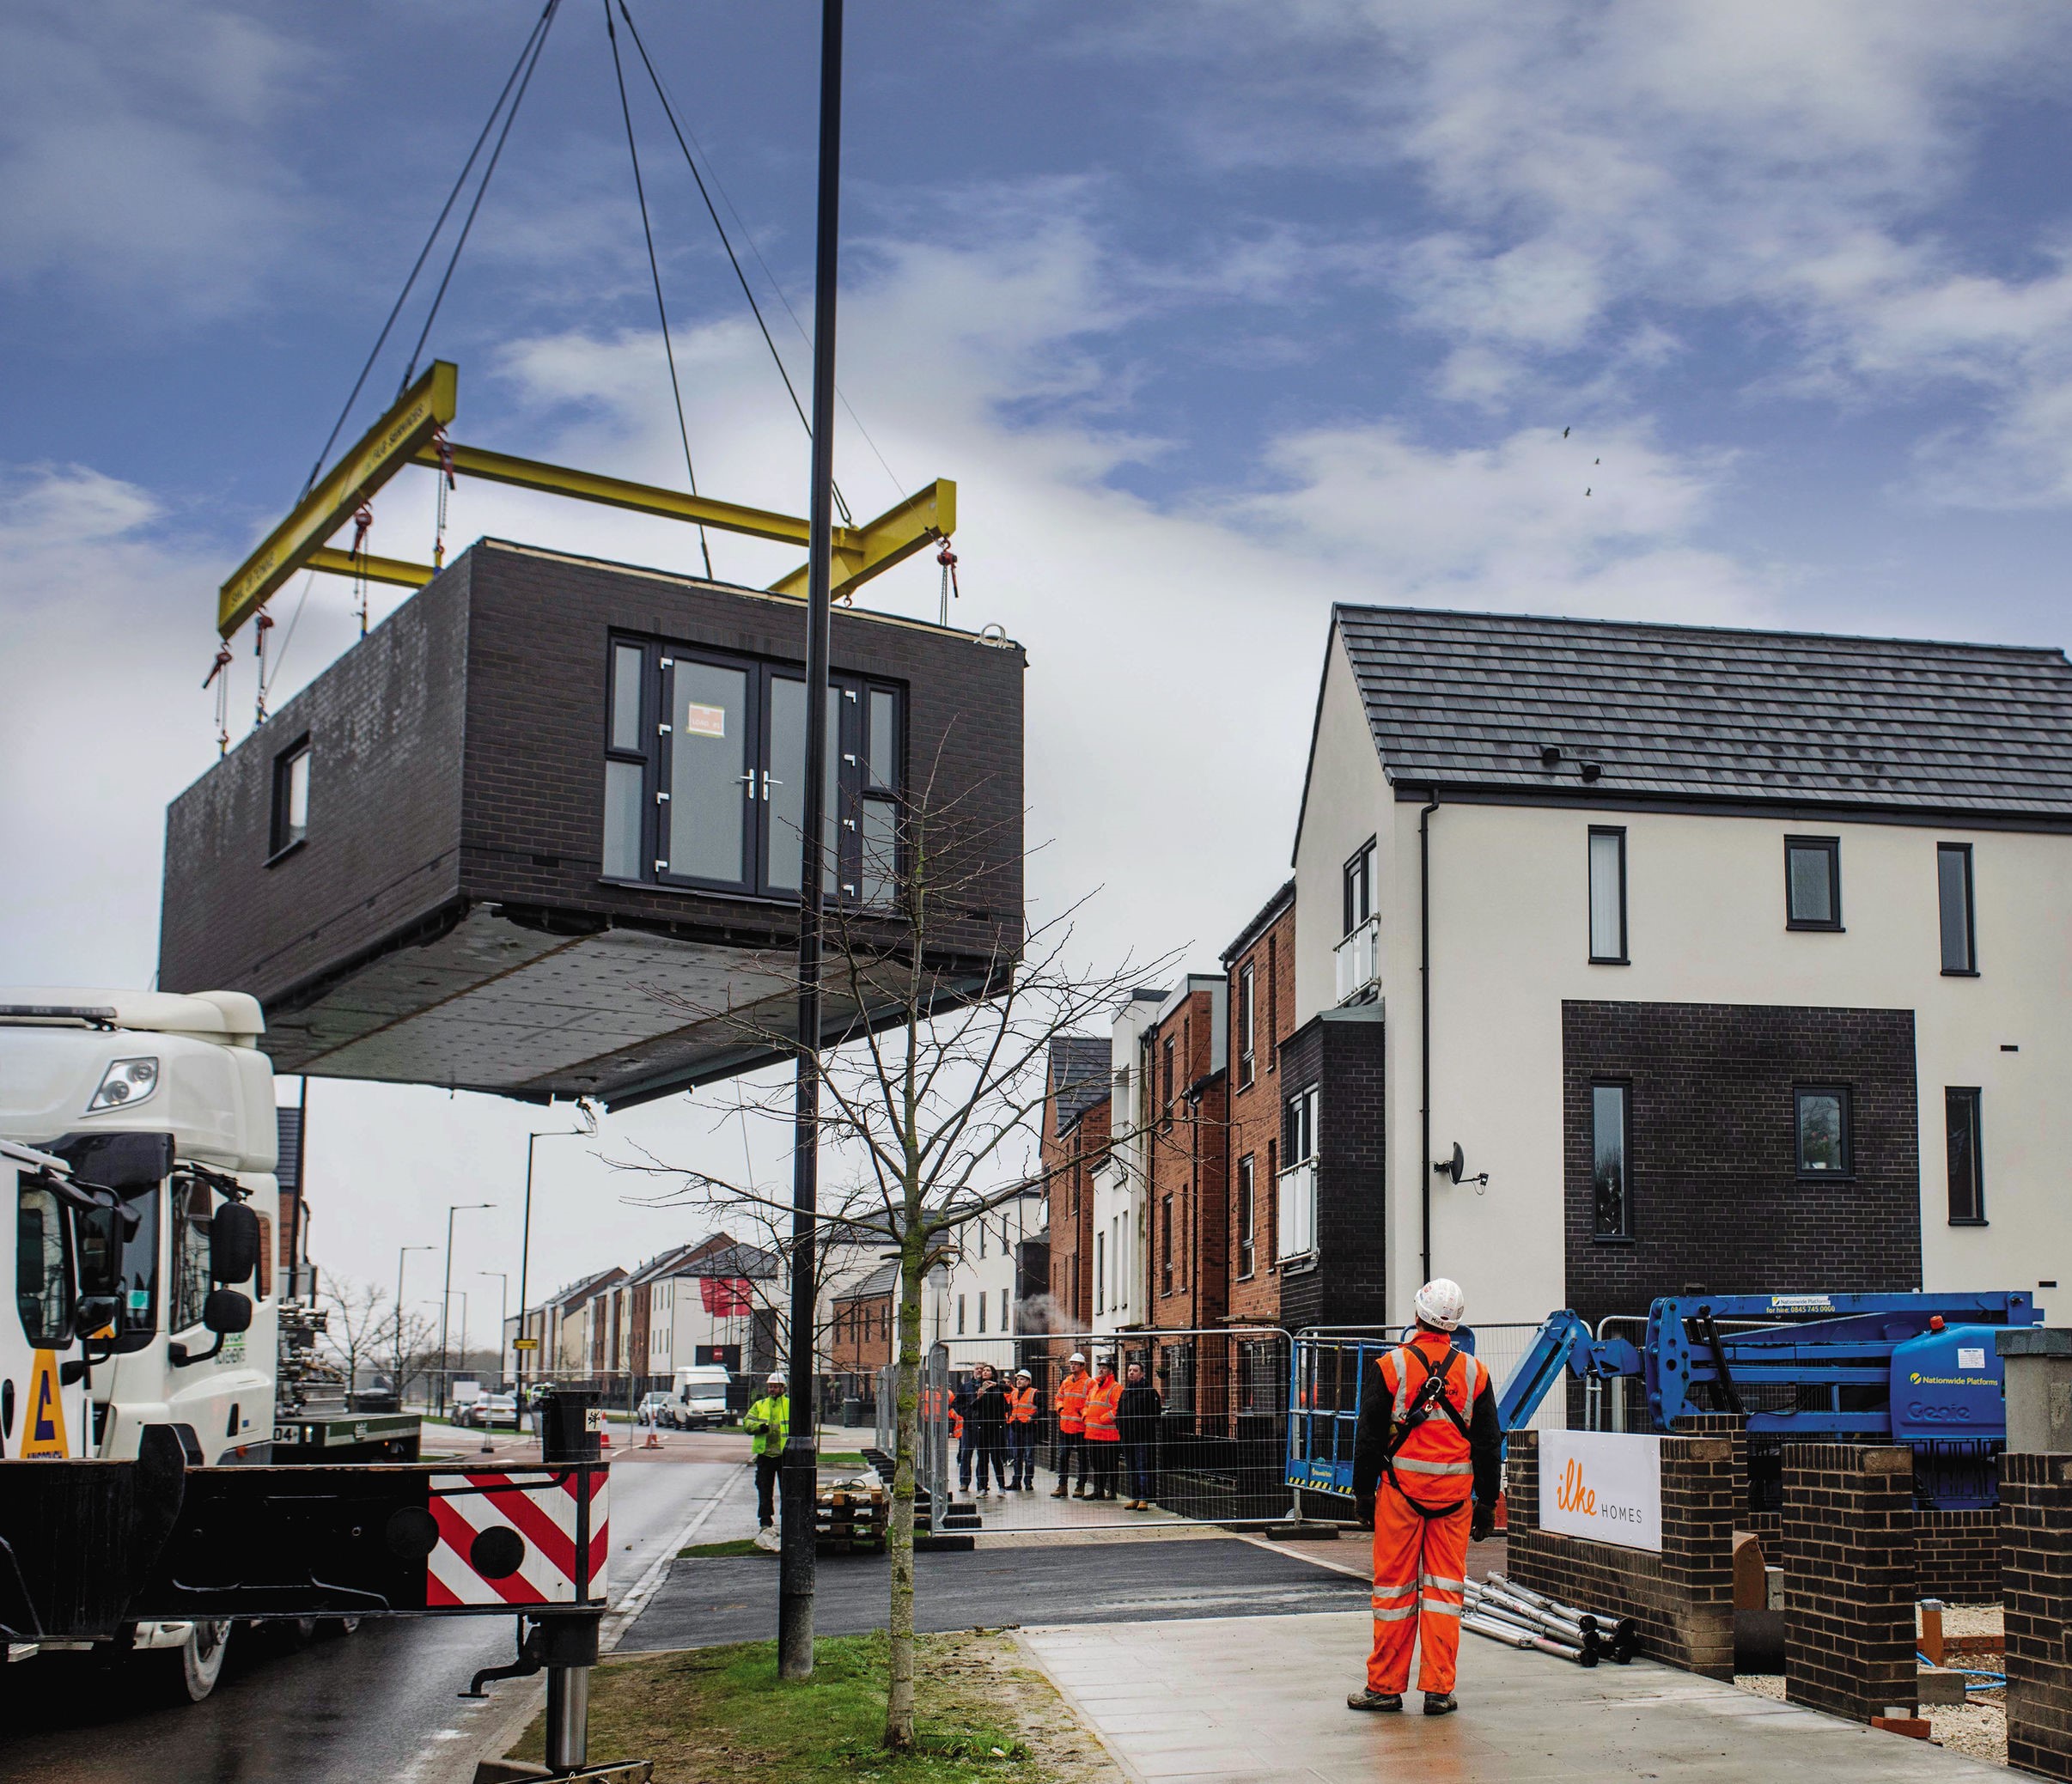 Prefabs sprouting: Modern Methods of Construction and the English housing crisis | Faculty of Engineering and Physical Sciences | University of Leeds